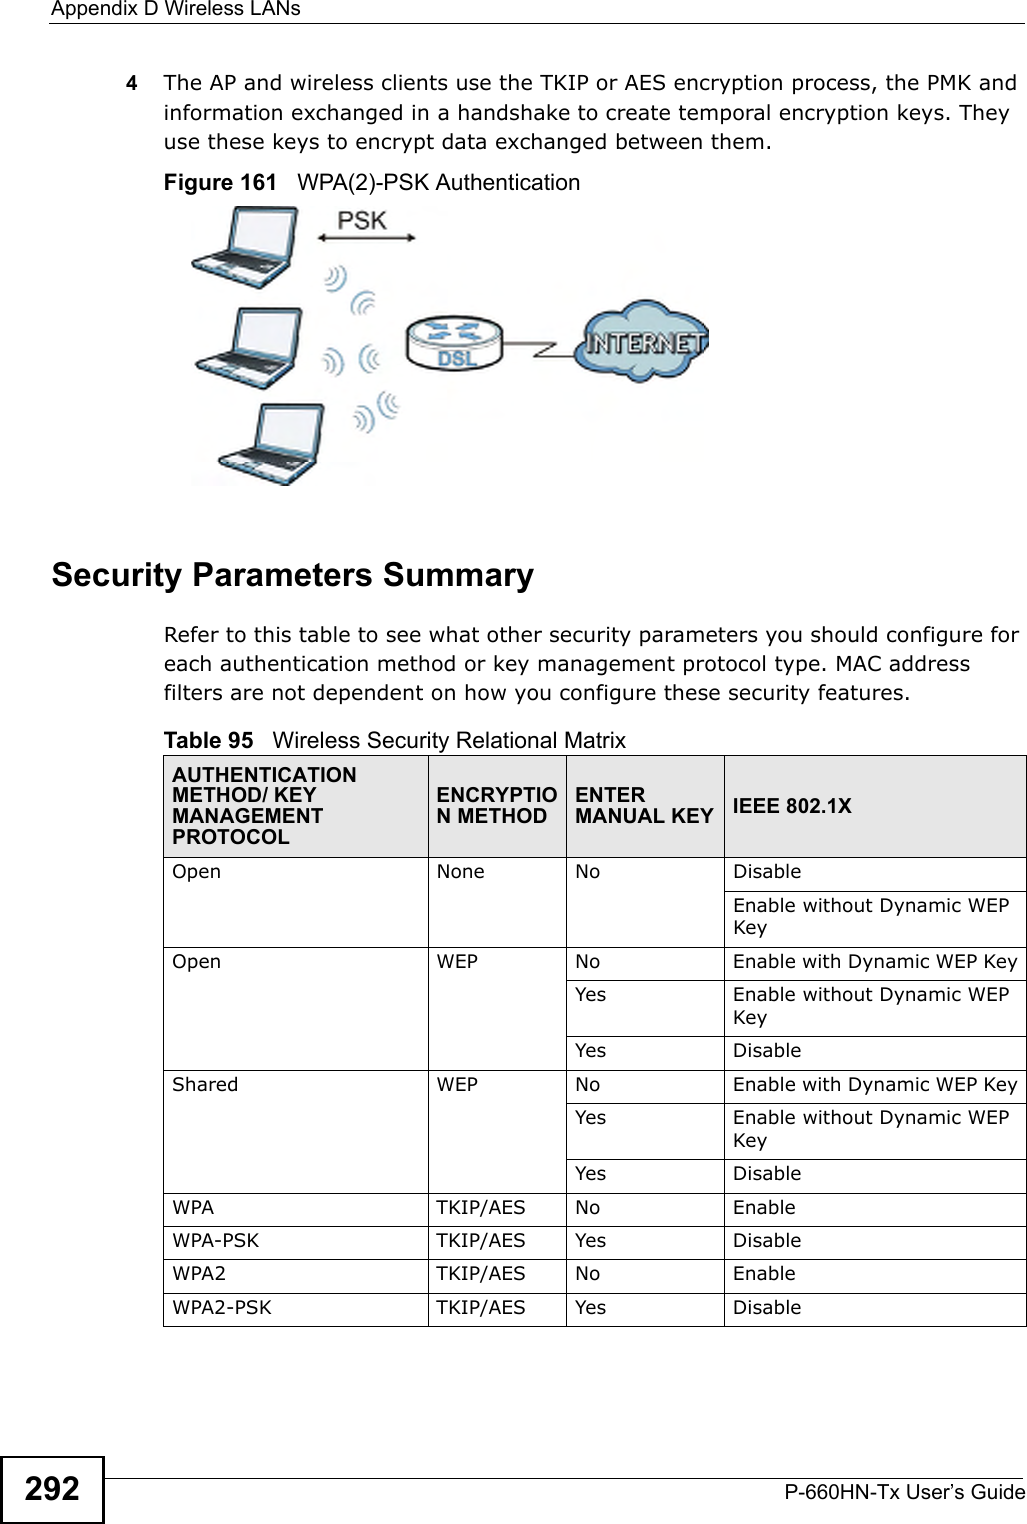 Appendix D Wireless LANsP-660HN-Tx User’s Guide2924The AP and wireless clients use the TKIP or AES encryption process, the PMK and information exchanged in a handshake to create temporal encryption keys. They use these keys to encrypt data exchanged between them.Figure 161   WPA(2)-PSK AuthenticationSecurity Parameters SummaryRefer to this table to see what other security parameters you should configure for each authentication method or key management protocol type. MAC address filters are not dependent on how you configure these security features.Table 95   Wireless Security Relational MatrixAUTHENTICATION METHOD/ KEY MANAGEMENT PROTOCOLENCRYPTION METHODENTER MANUAL KEY IEEE 802.1XOpen None No DisableEnable without Dynamic WEP KeyOpen WEP No           Enable with Dynamic WEP KeyYes Enable without Dynamic WEP KeyYes DisableShared WEP  No           Enable with Dynamic WEP KeyYes Enable without Dynamic WEP KeyYes DisableWPA  TKIP/AES No EnableWPA-PSK  TKIP/AES Yes DisableWPA2 TKIP/AES No EnableWPA2-PSK  TKIP/AES Yes Disable